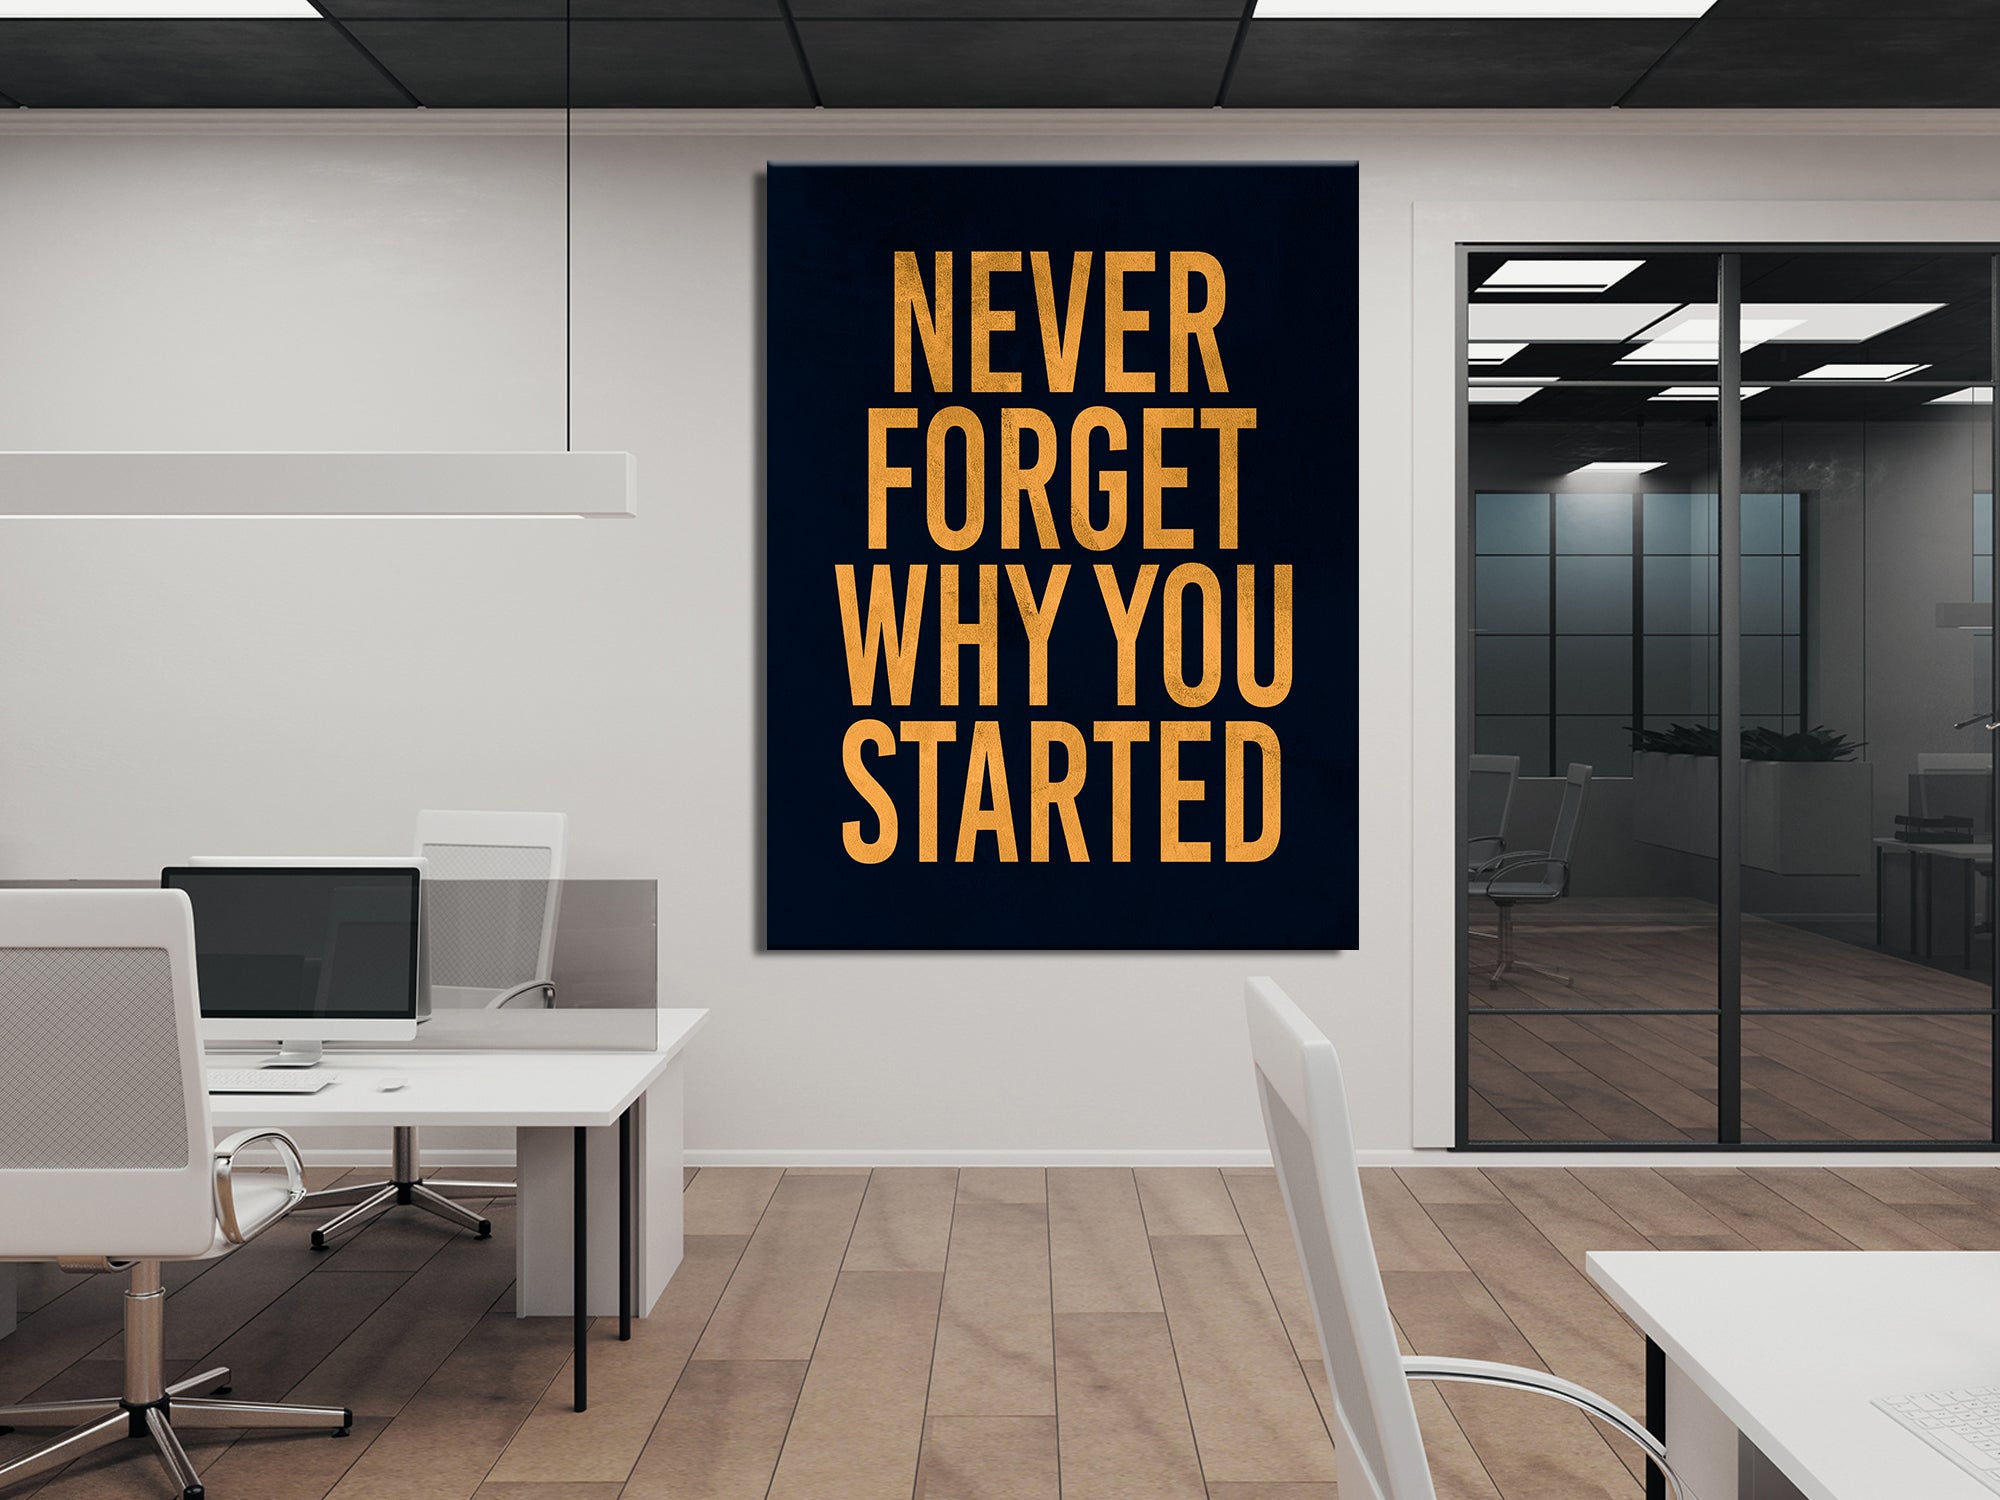 Never Forget - Inspiring - Living Room Canvas Wall Art